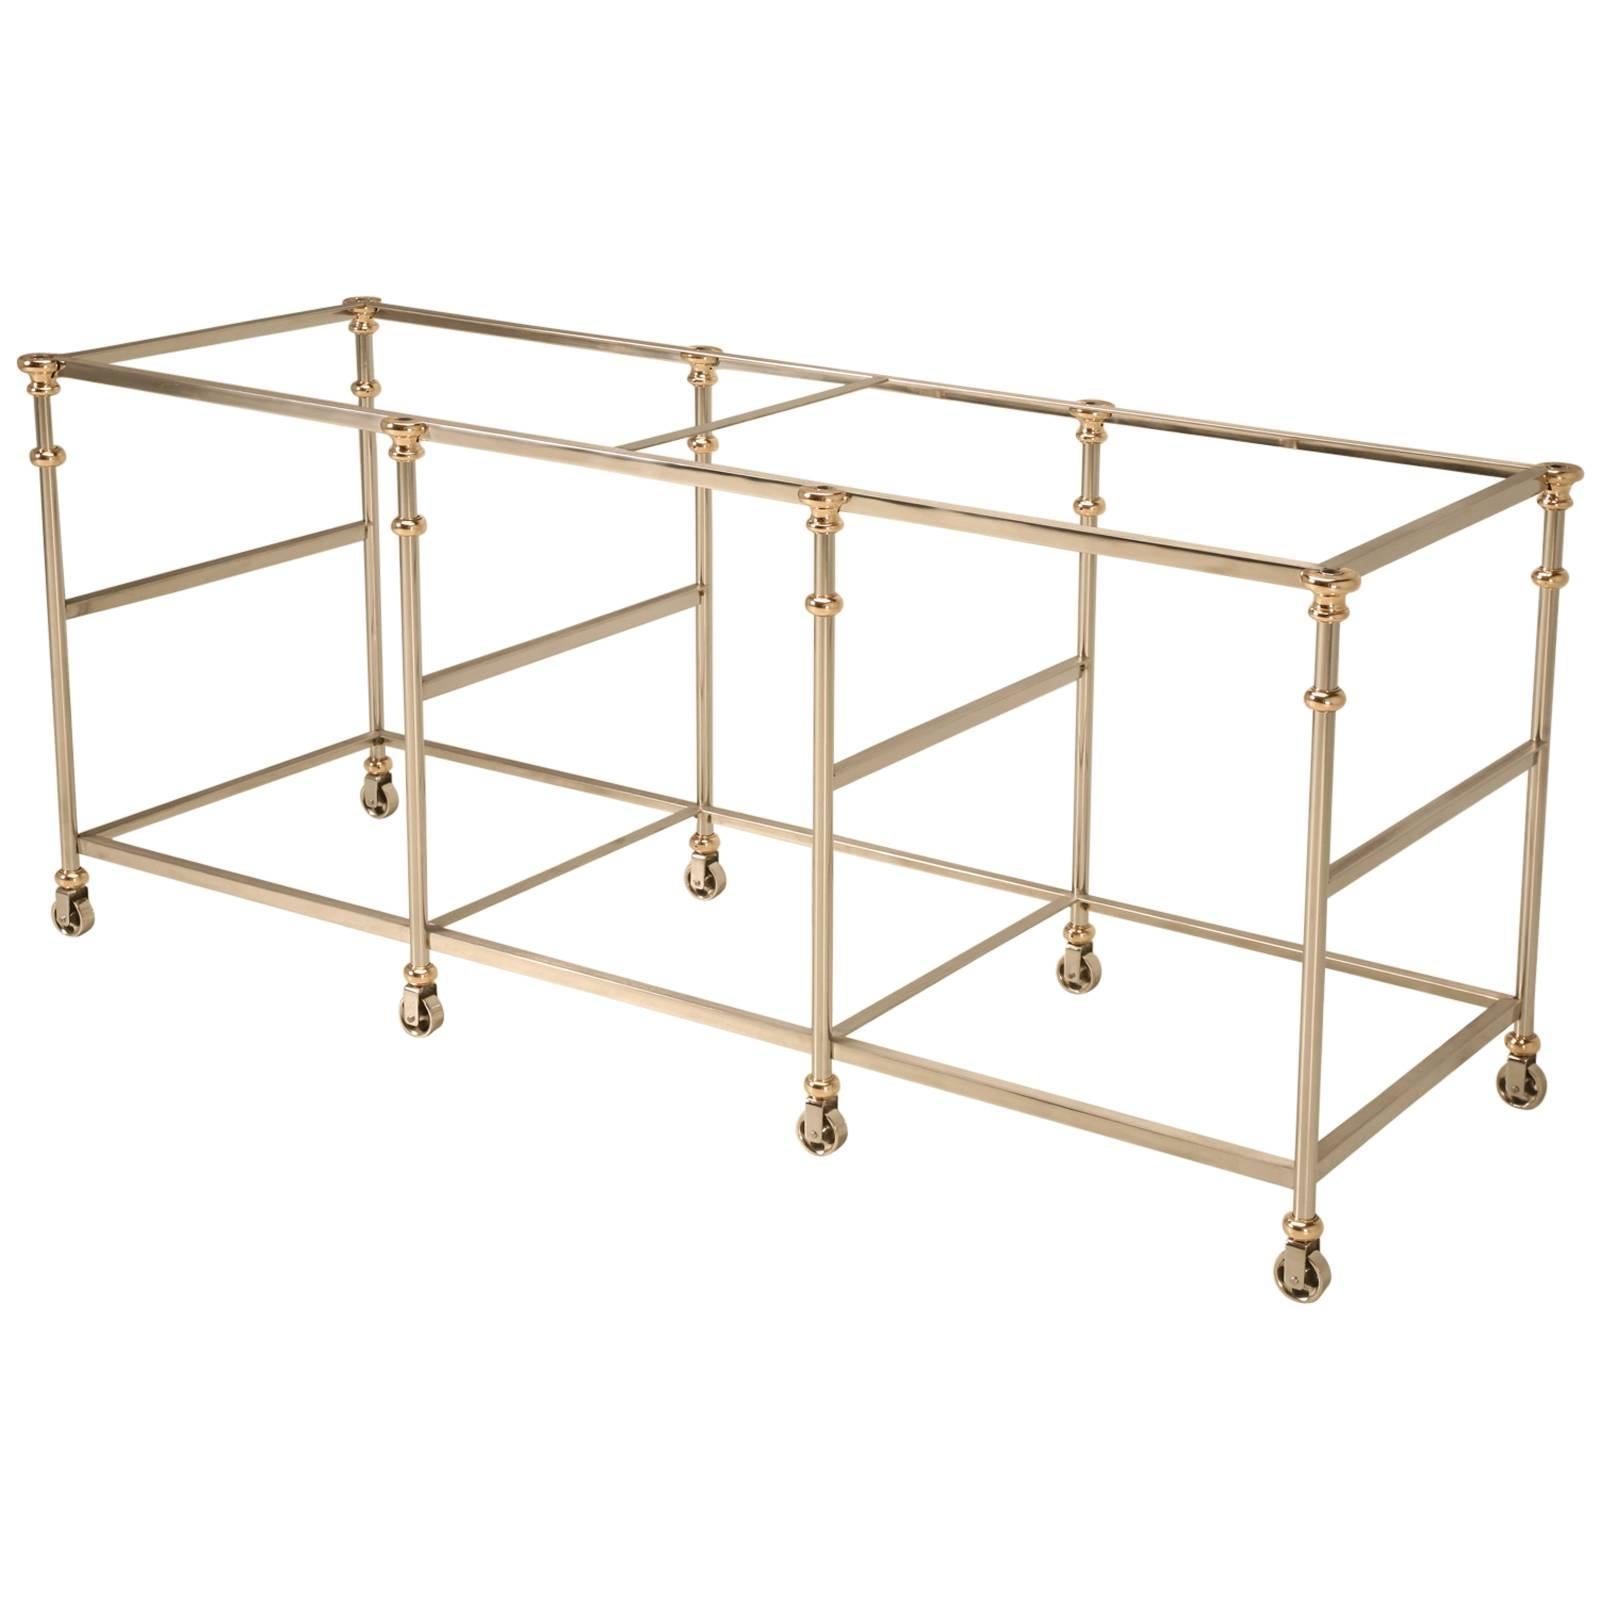 French Inspired Kitchen Island Frame, Stainless and Brass Available in Any Size For Sale